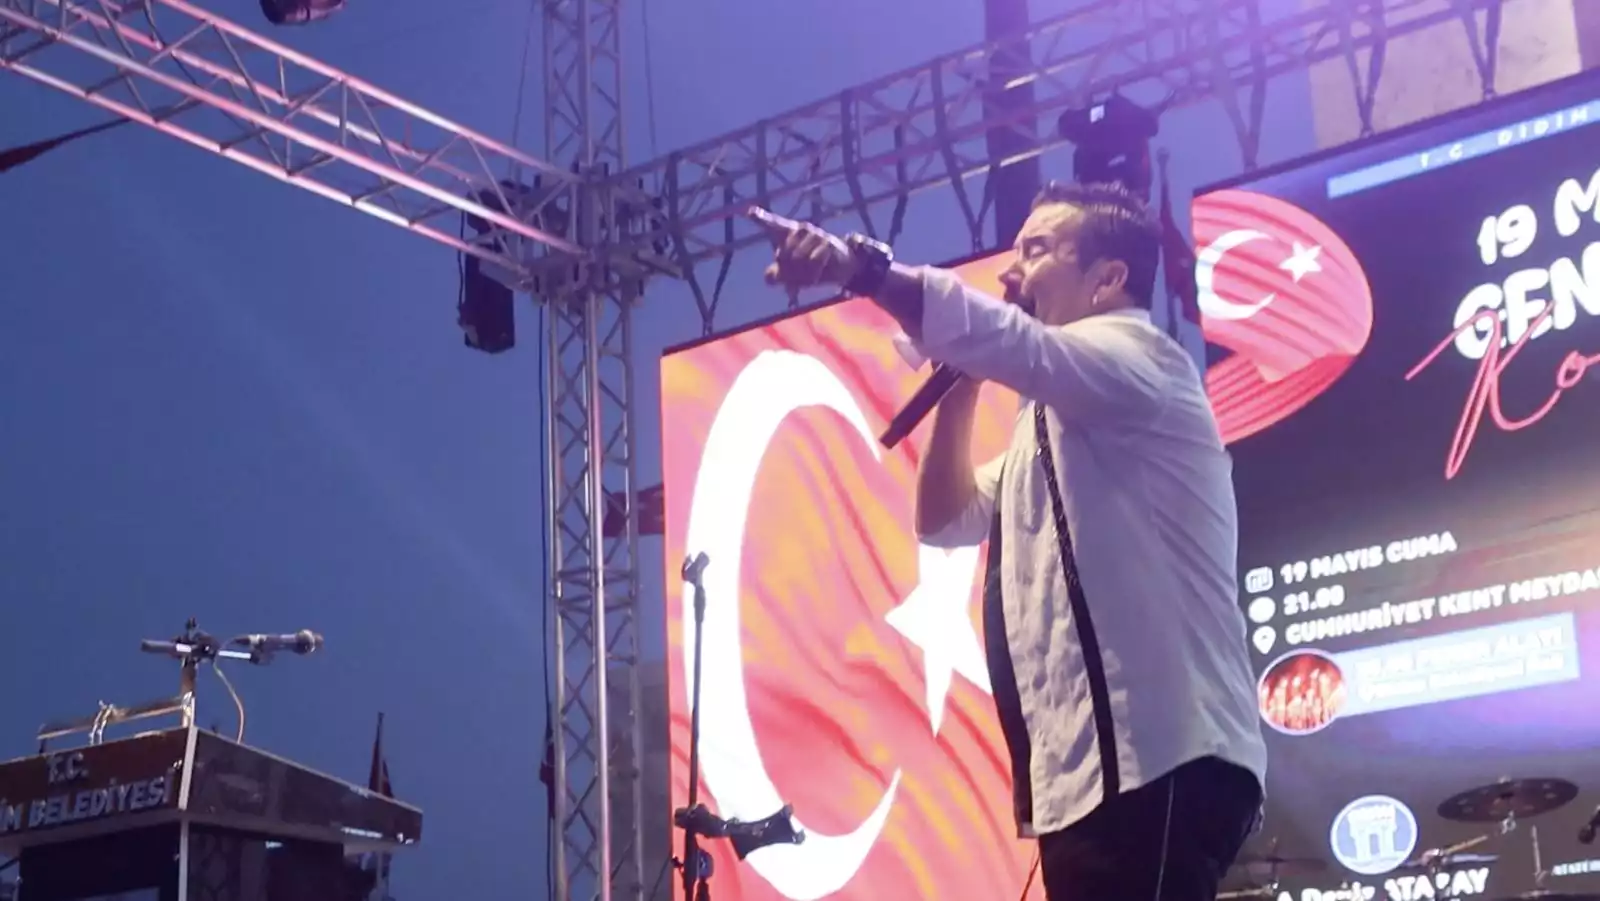 A man is singing in a concert on the night of May 19 in Didim's Cumhuriet Square.